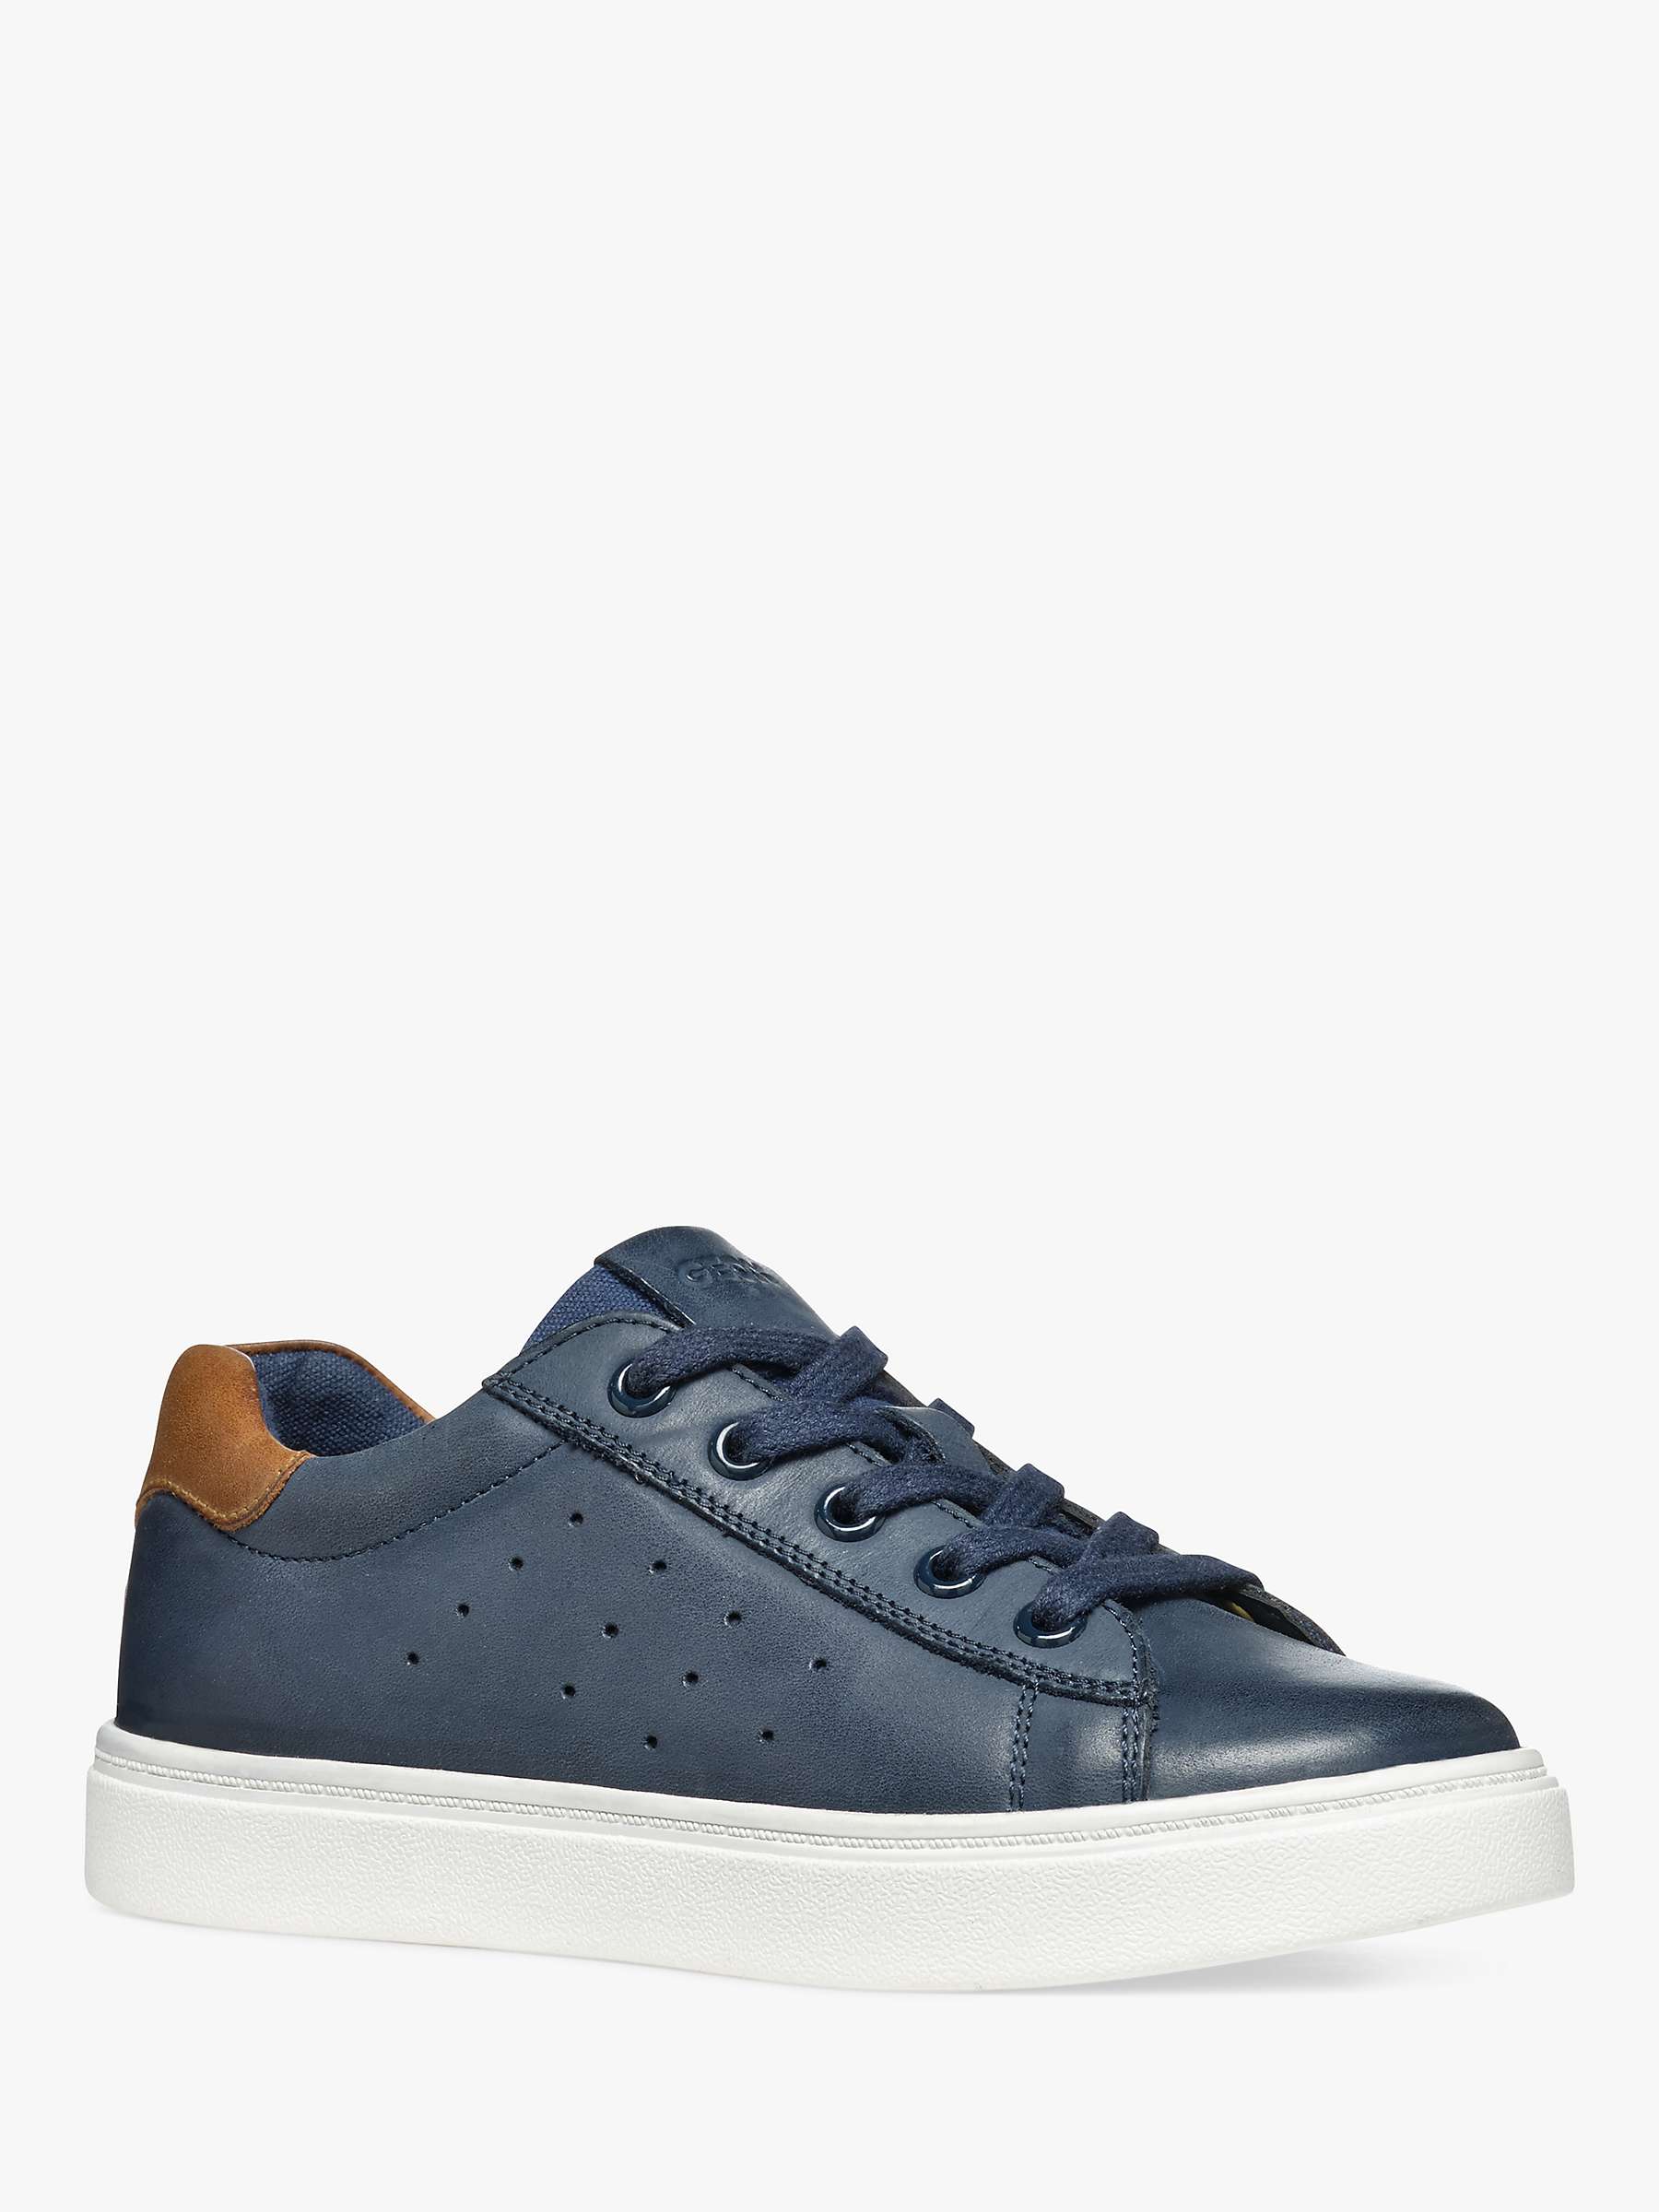 Buy Geox Kids' Nashik Leather Blend Lace Up Trainers, Navy/Brown Online at johnlewis.com